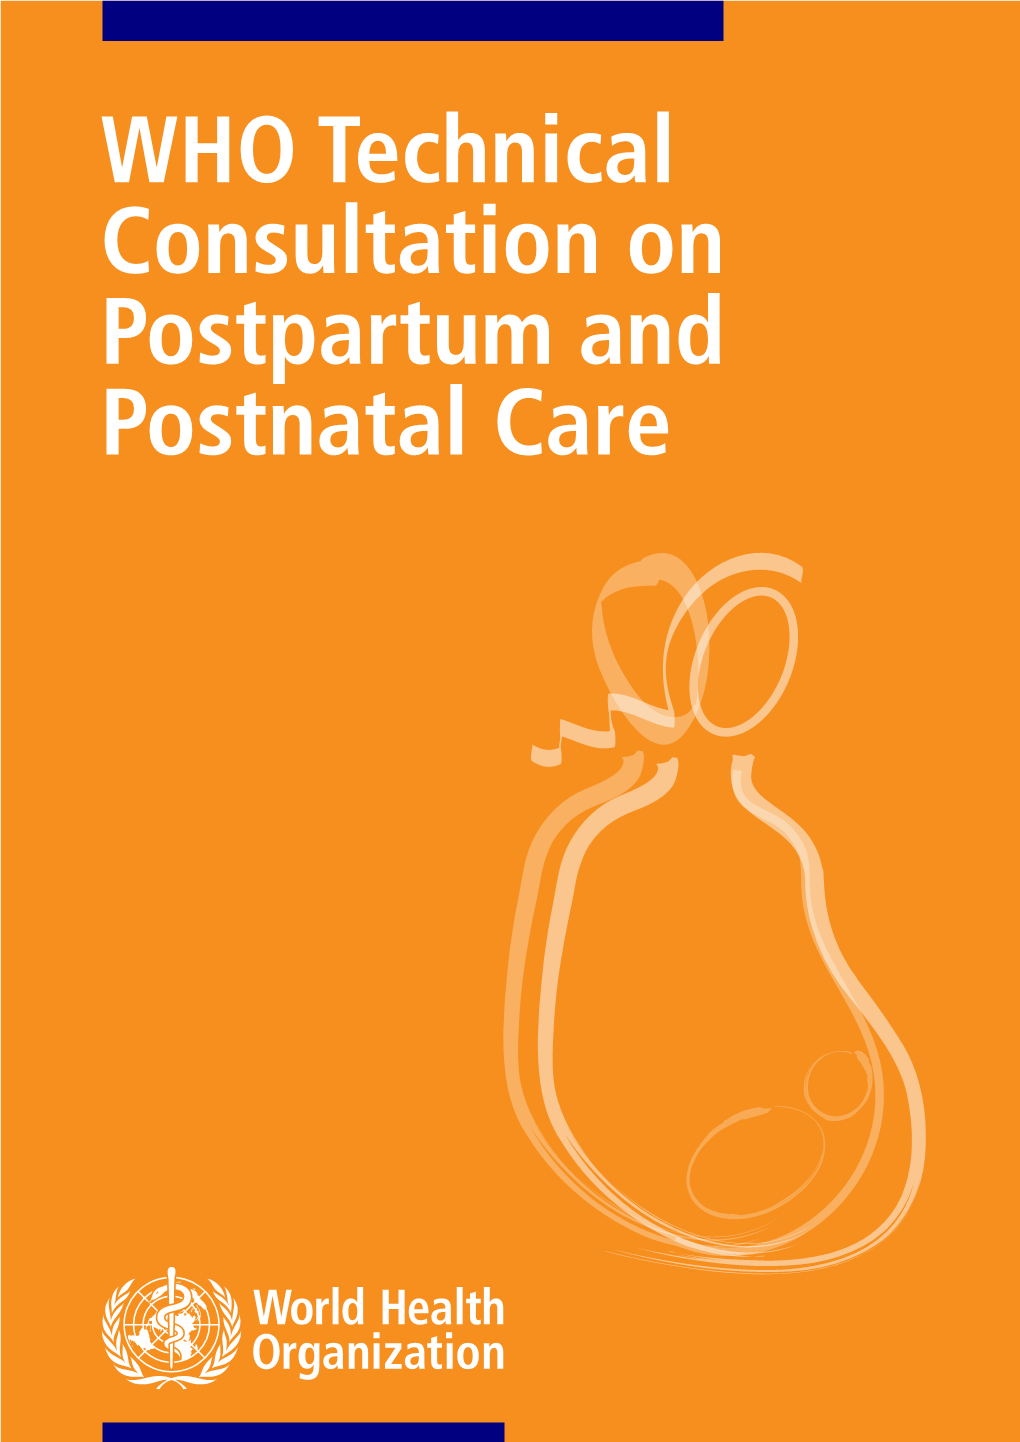 WHO Technical Consultation on Postpartum and Postnatal Care